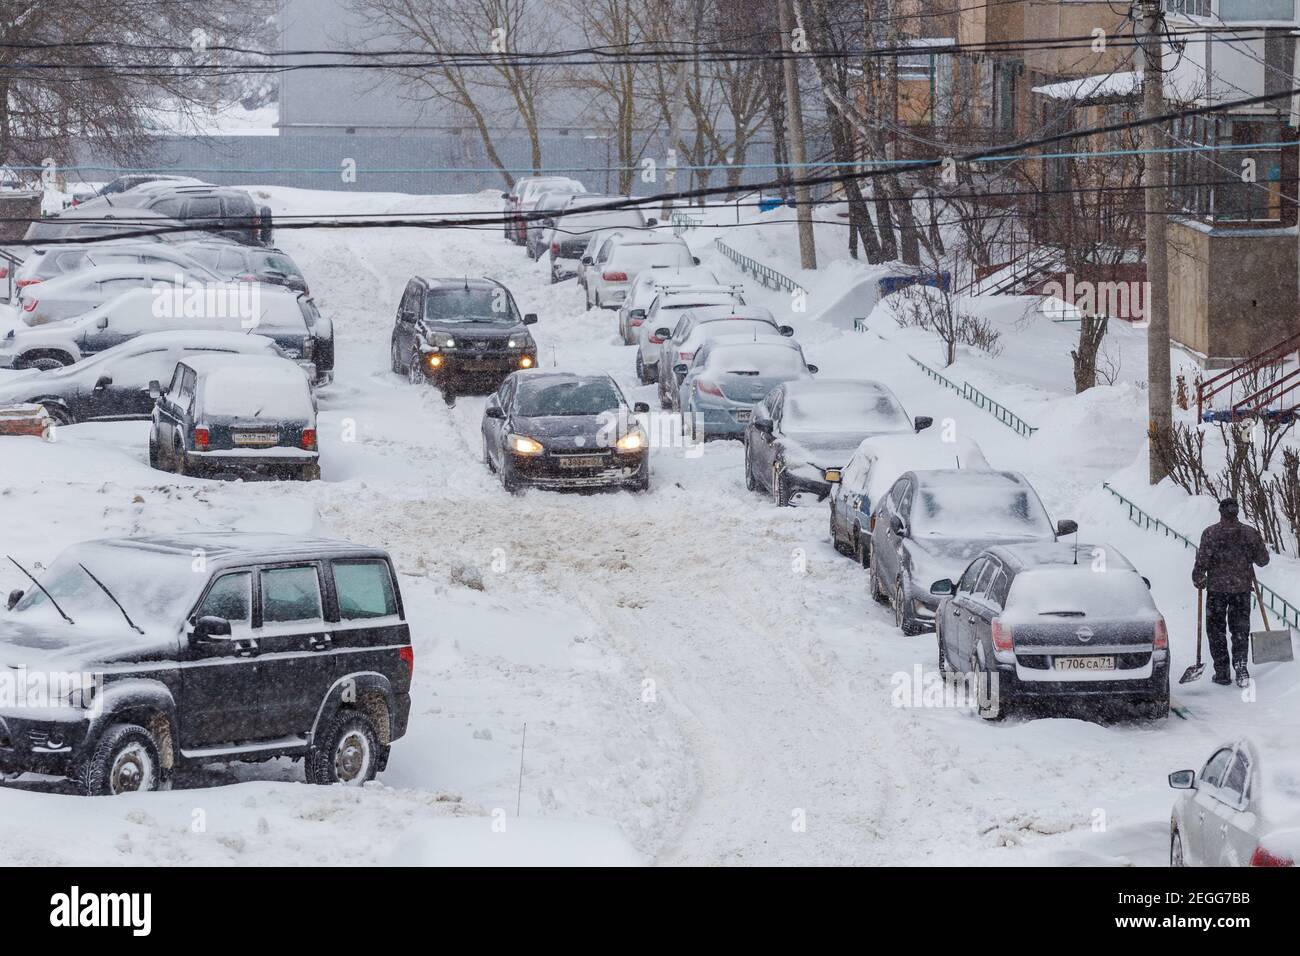 Tula, Russia - February 13, 2021: Two cars drive through a snowy yard between rows of parked cars in deep snow. Stock Photo